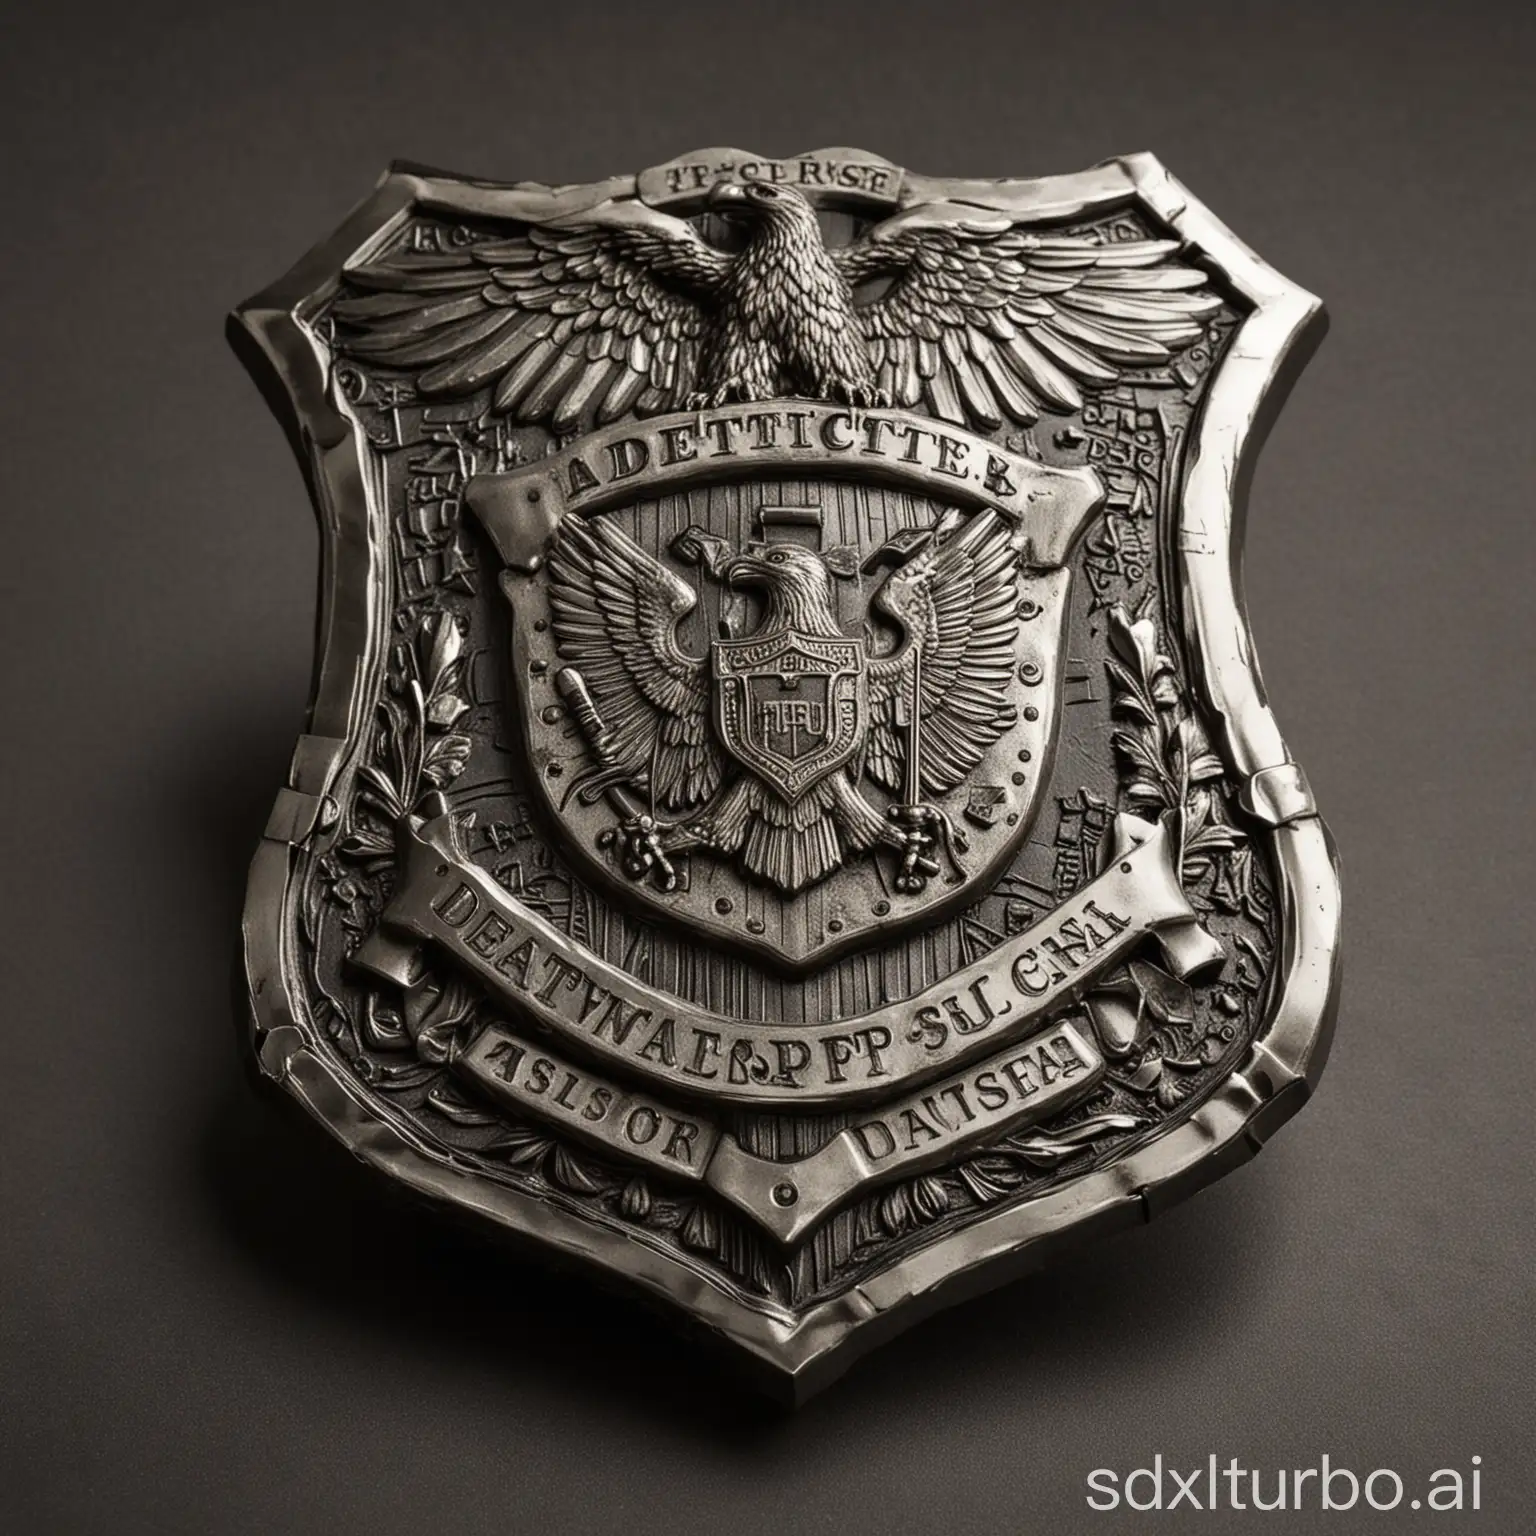 A high-definition detective's badge made of polished metal with intricate engravings. The badge is shield-shaped, featuring an emblem at the center such as a star or an eagle. The word 'Detective' is prominently displayed along with a unique badge number and the department name. The metal surface is shiny and reflective, highlighting its polished finish. The background is simple and dark, making the details of the badge stand out. The style is realistic and detailed, emphasizing the craftsmanship and authority of the badge.